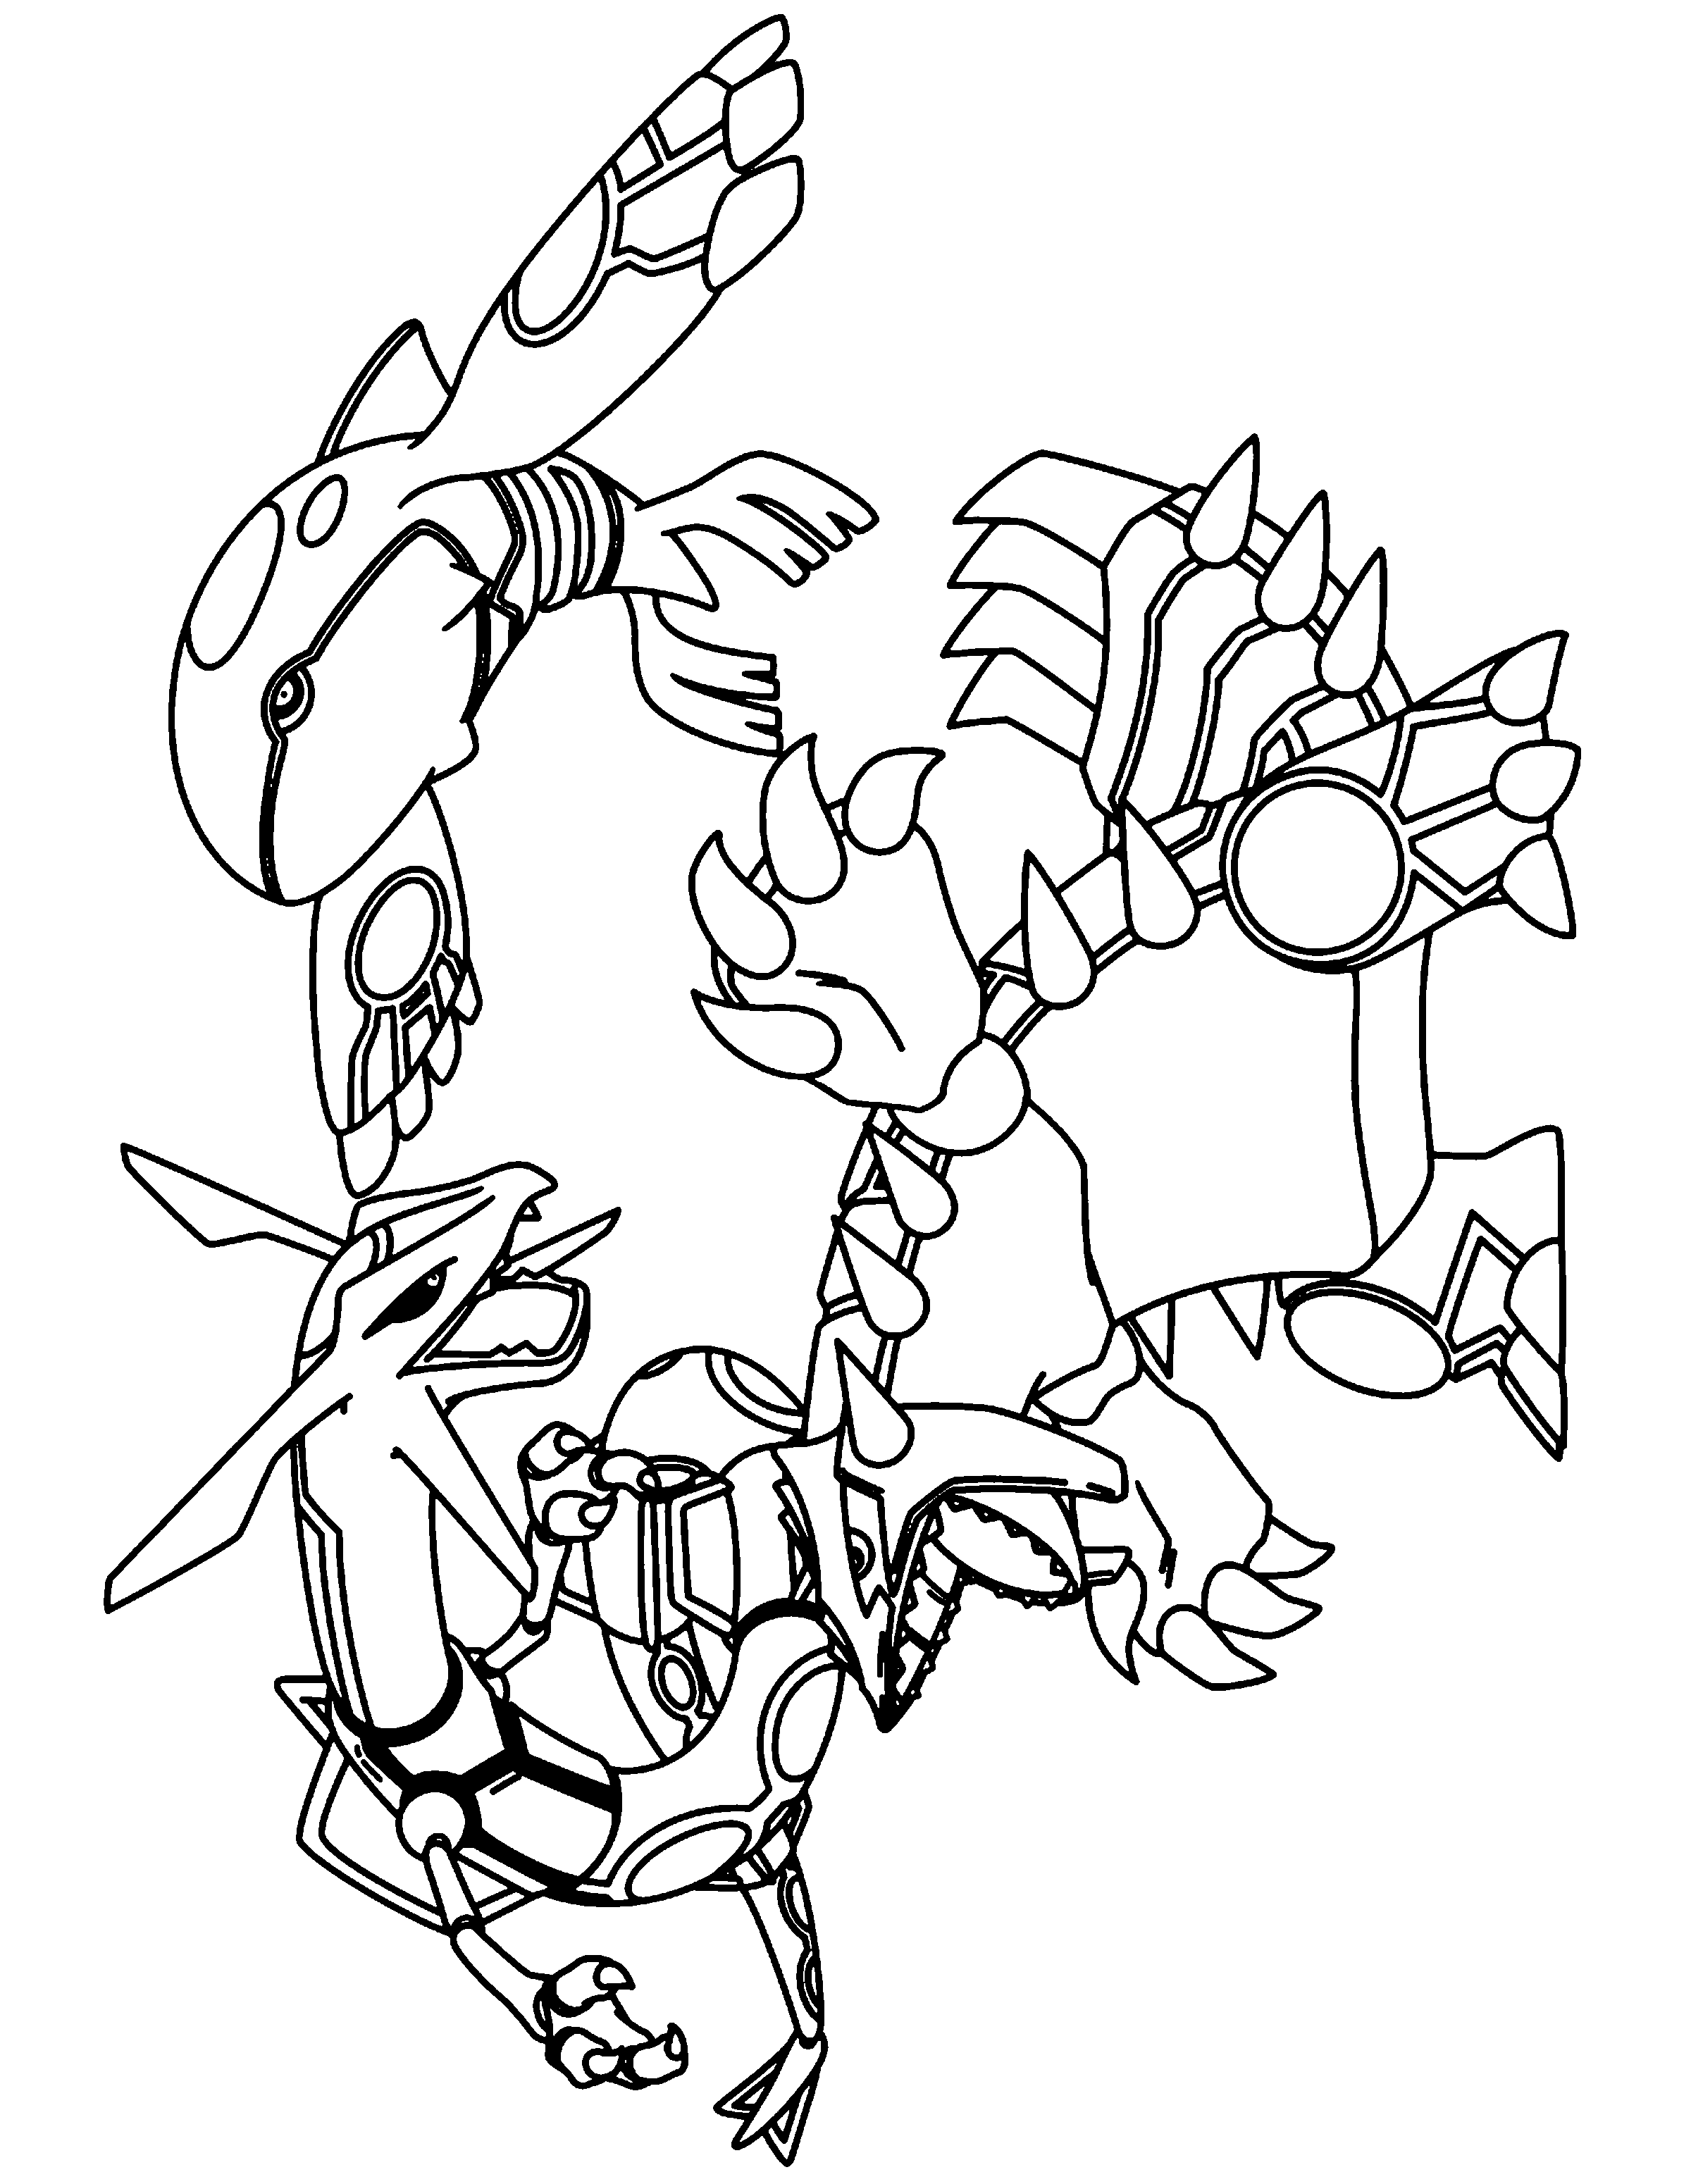 Cute Rayquaza Coloring Page for Kindergarten